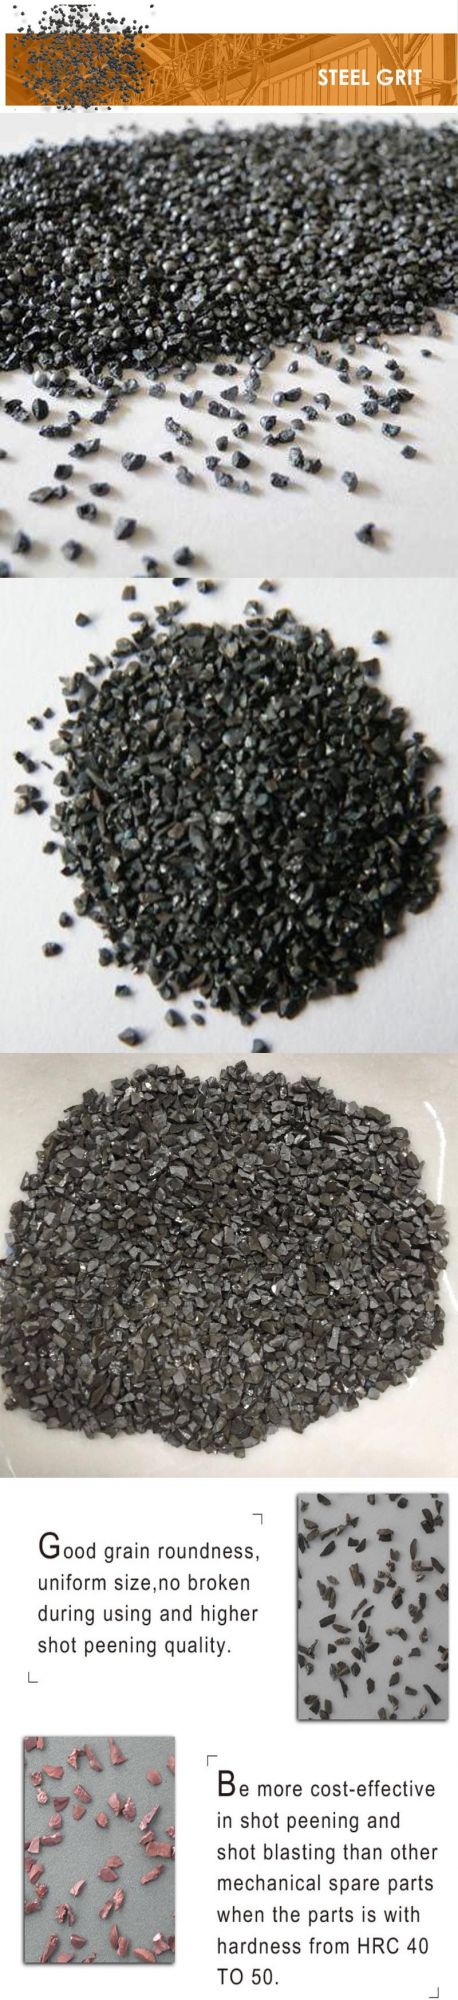 Environmental-Friendly Cast Steel Grit G80 for Surface Treatment